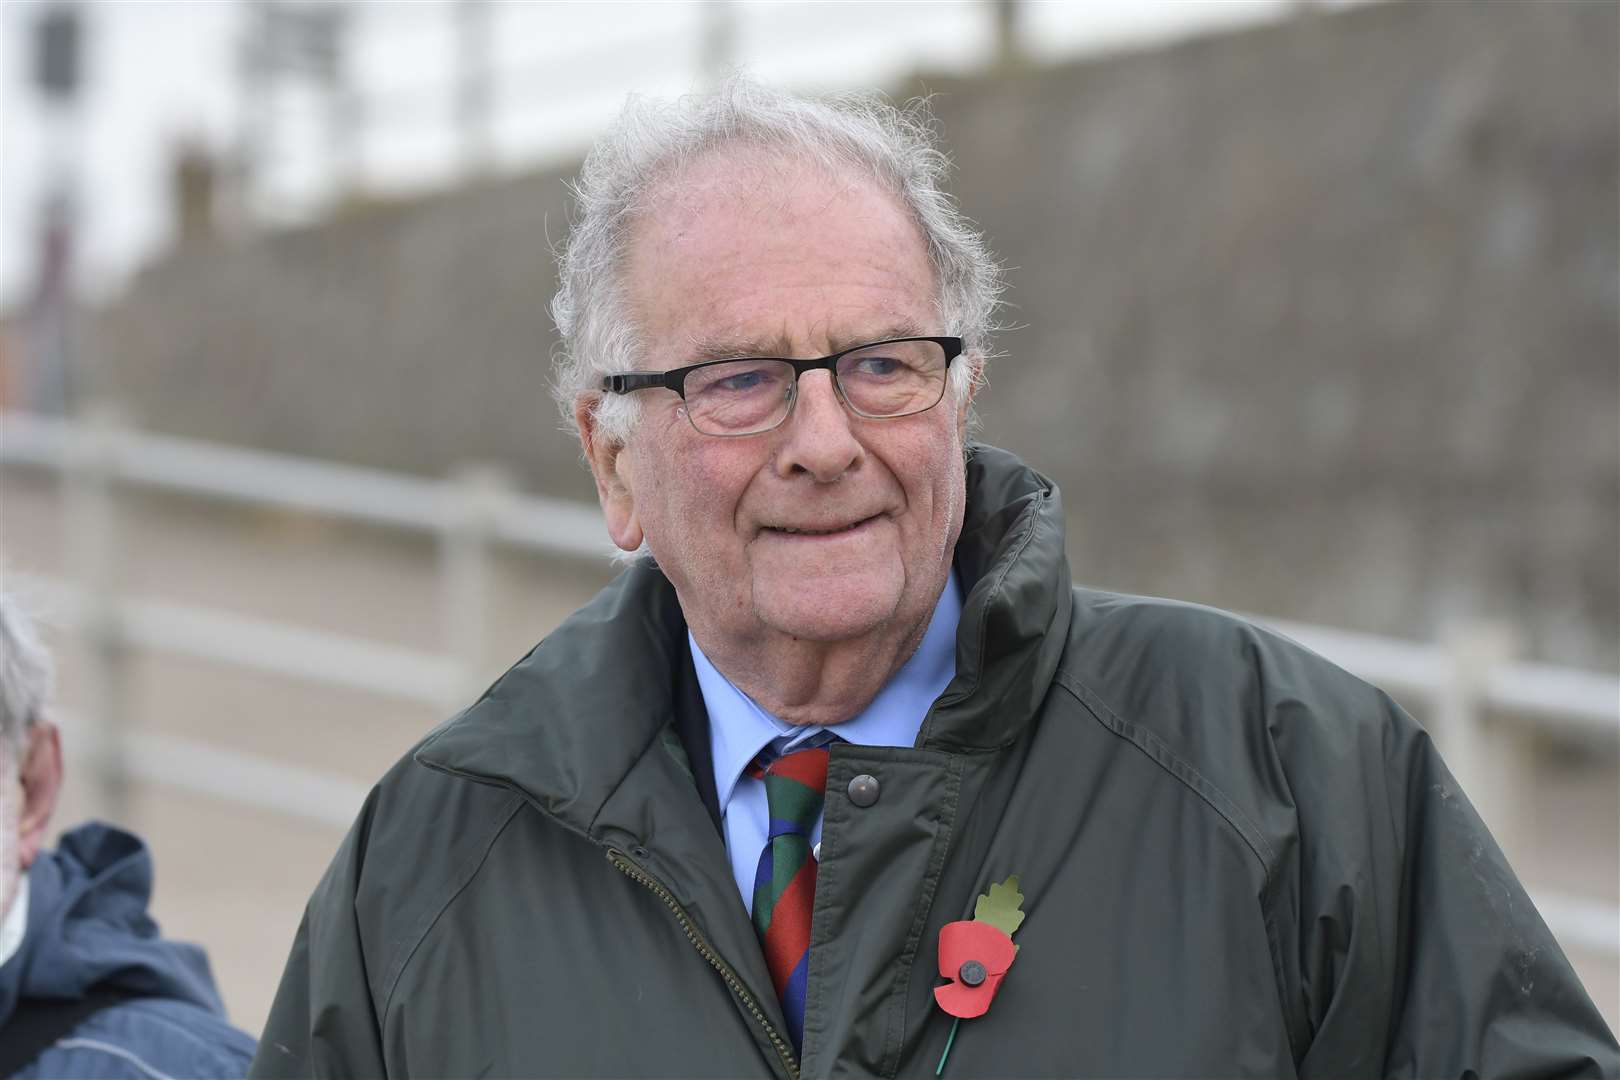 North Thanet MP Sir Roger Gale is backing the call for better rural 4G mobile coverage